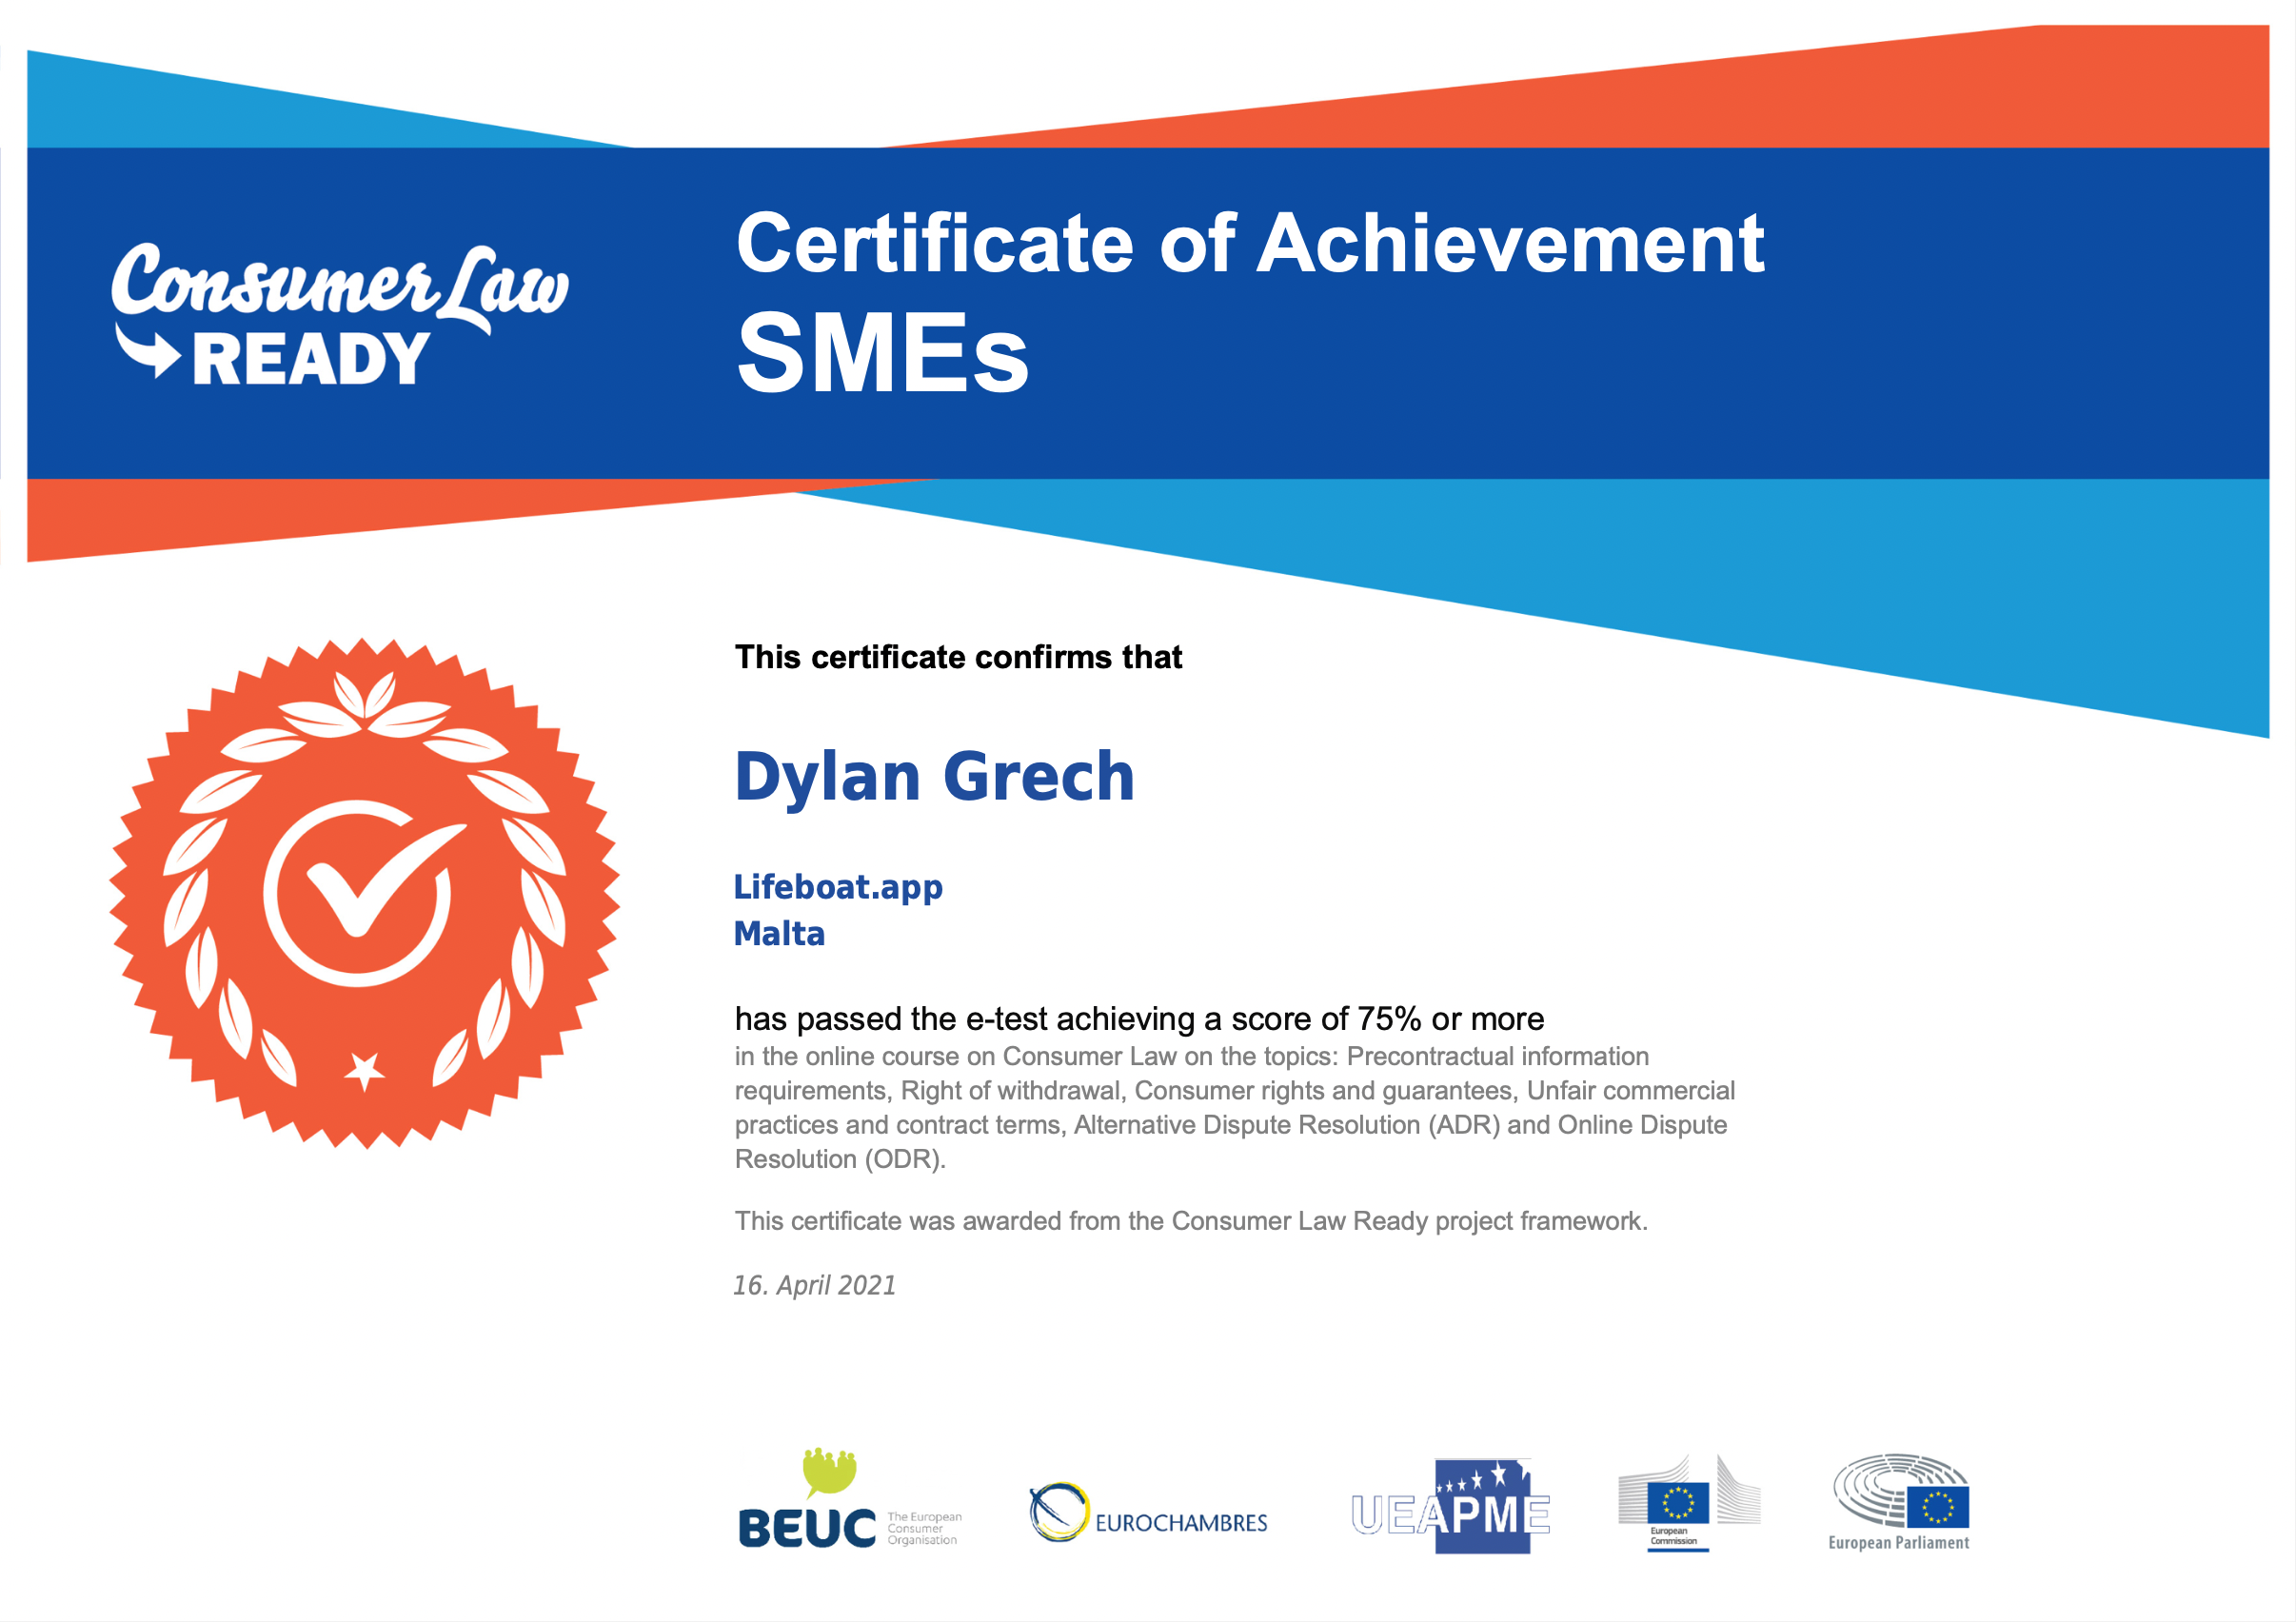 Dylan, founder of Lifeboat, certification of passing the e-test about EU Consumer Law